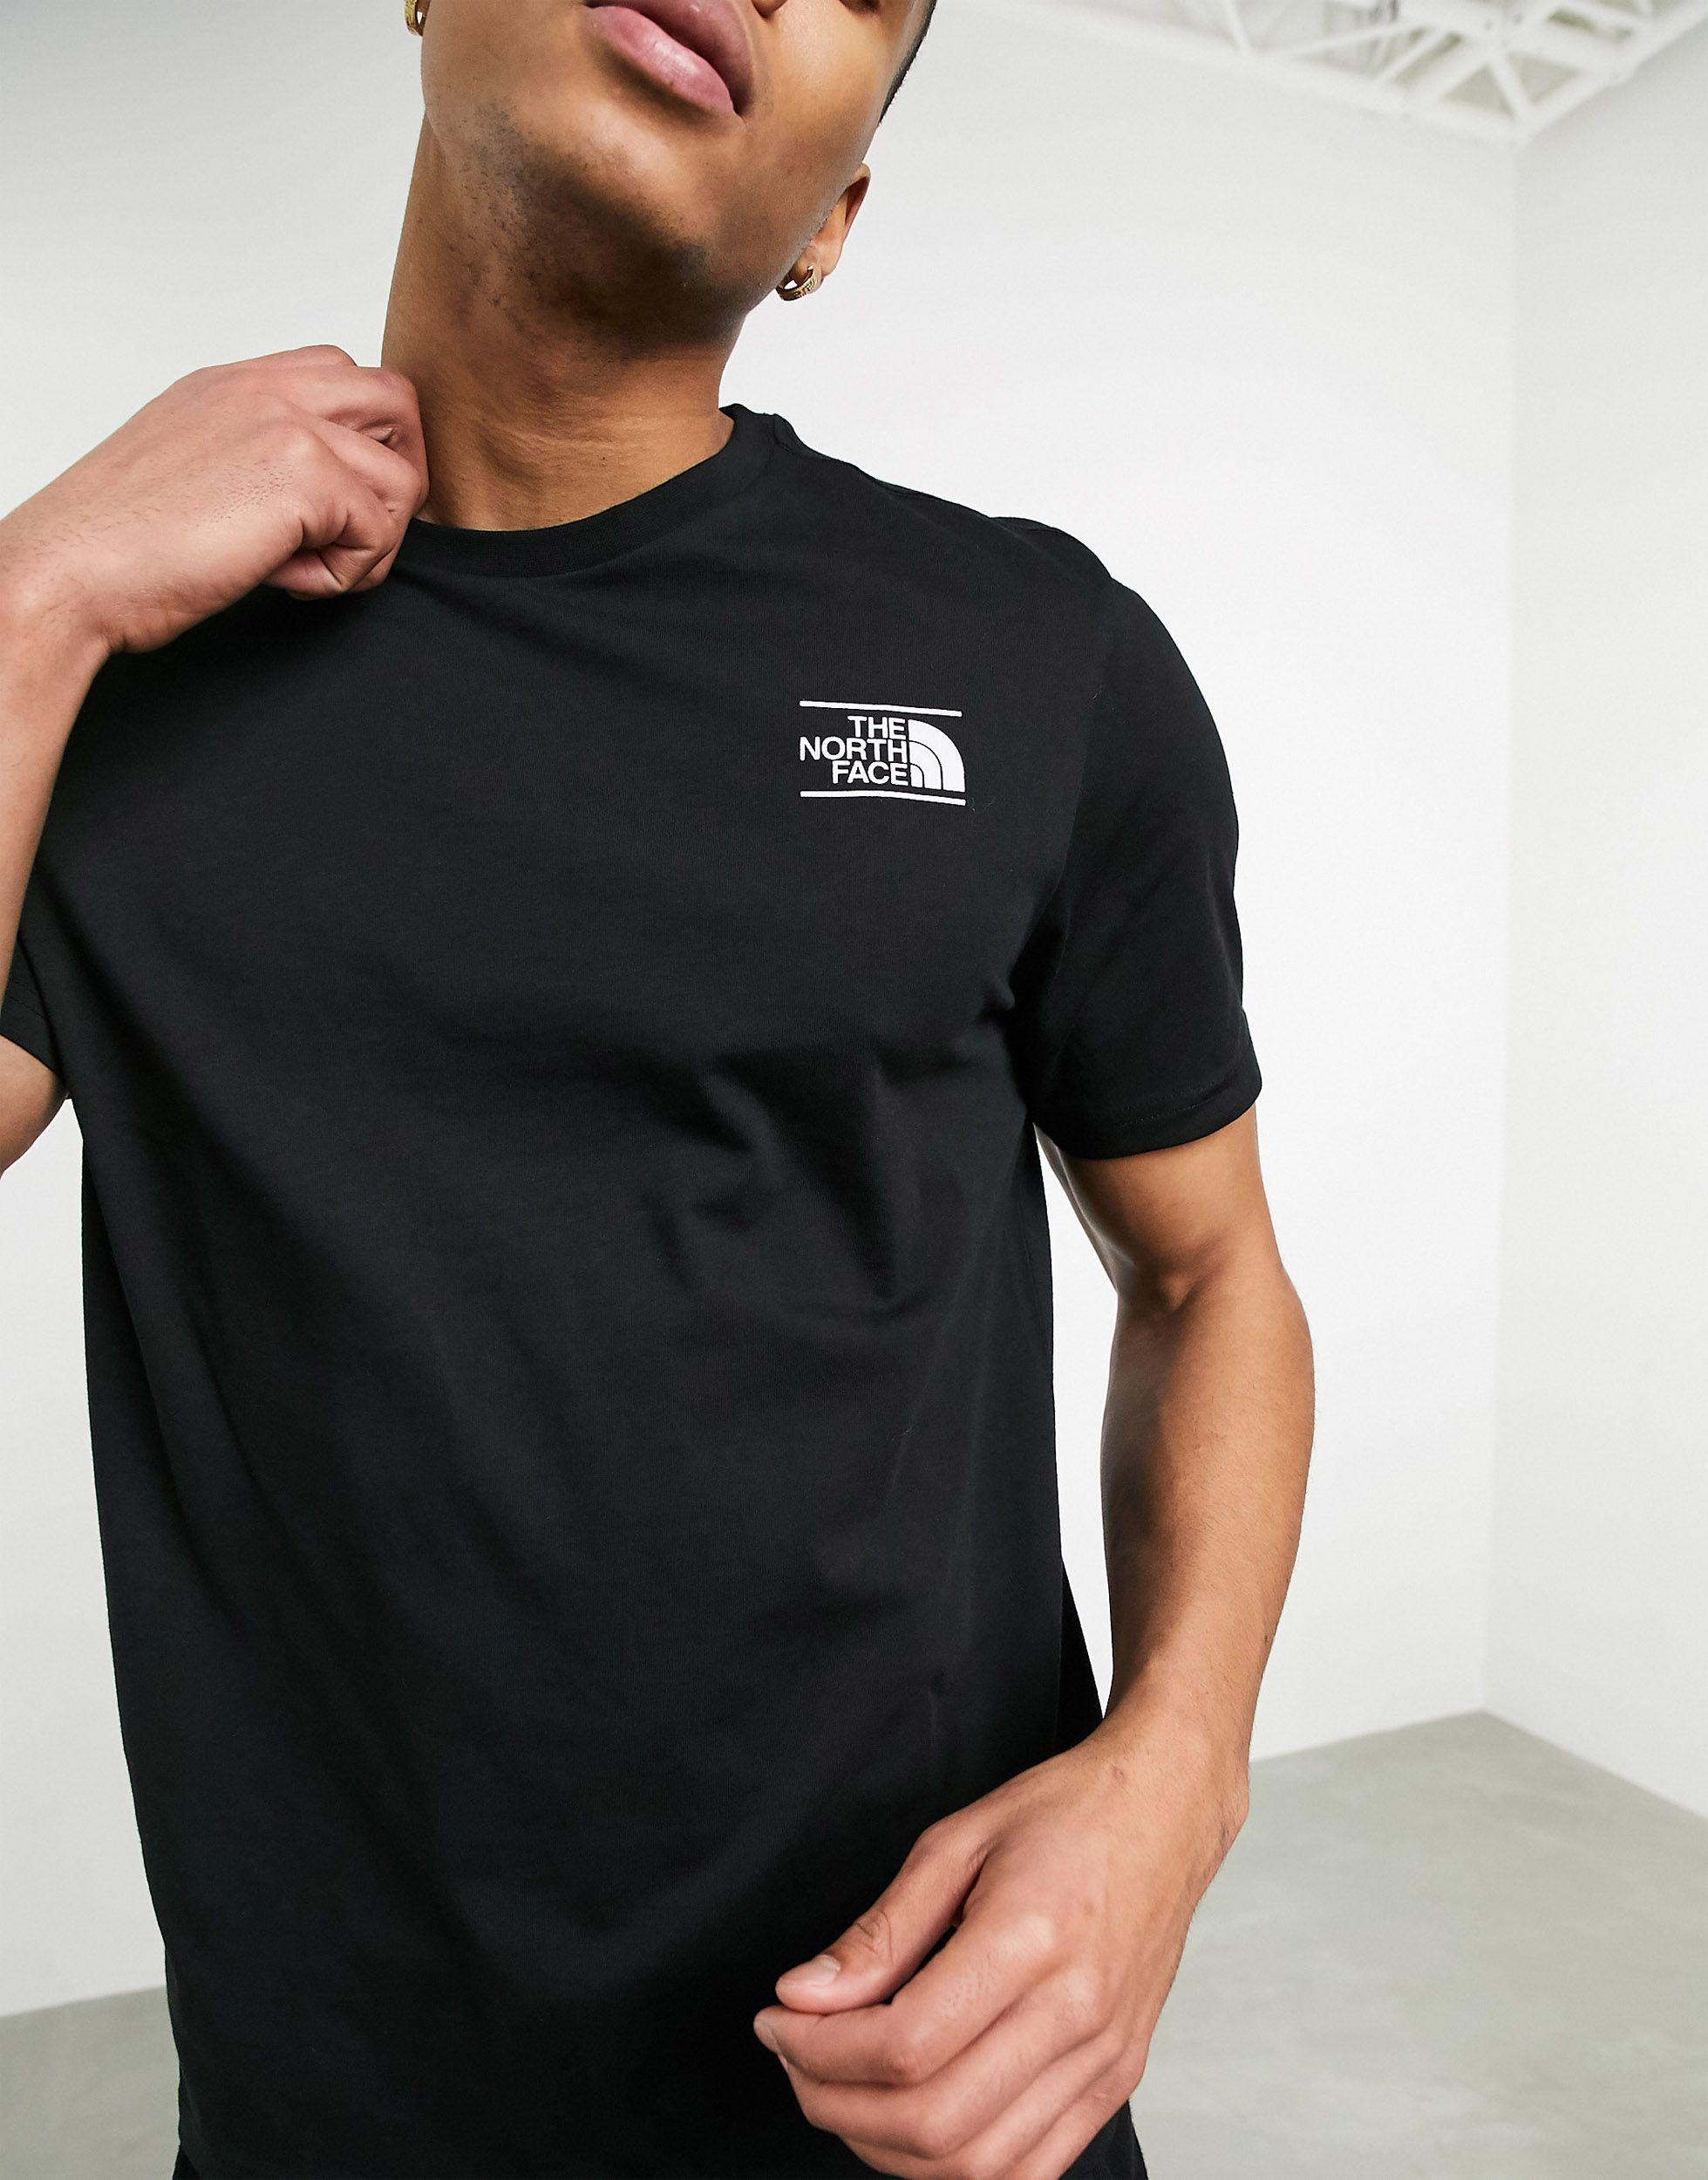 The North Face Cotton Mountain Graphic T-shirt in Black for Men - Lyst